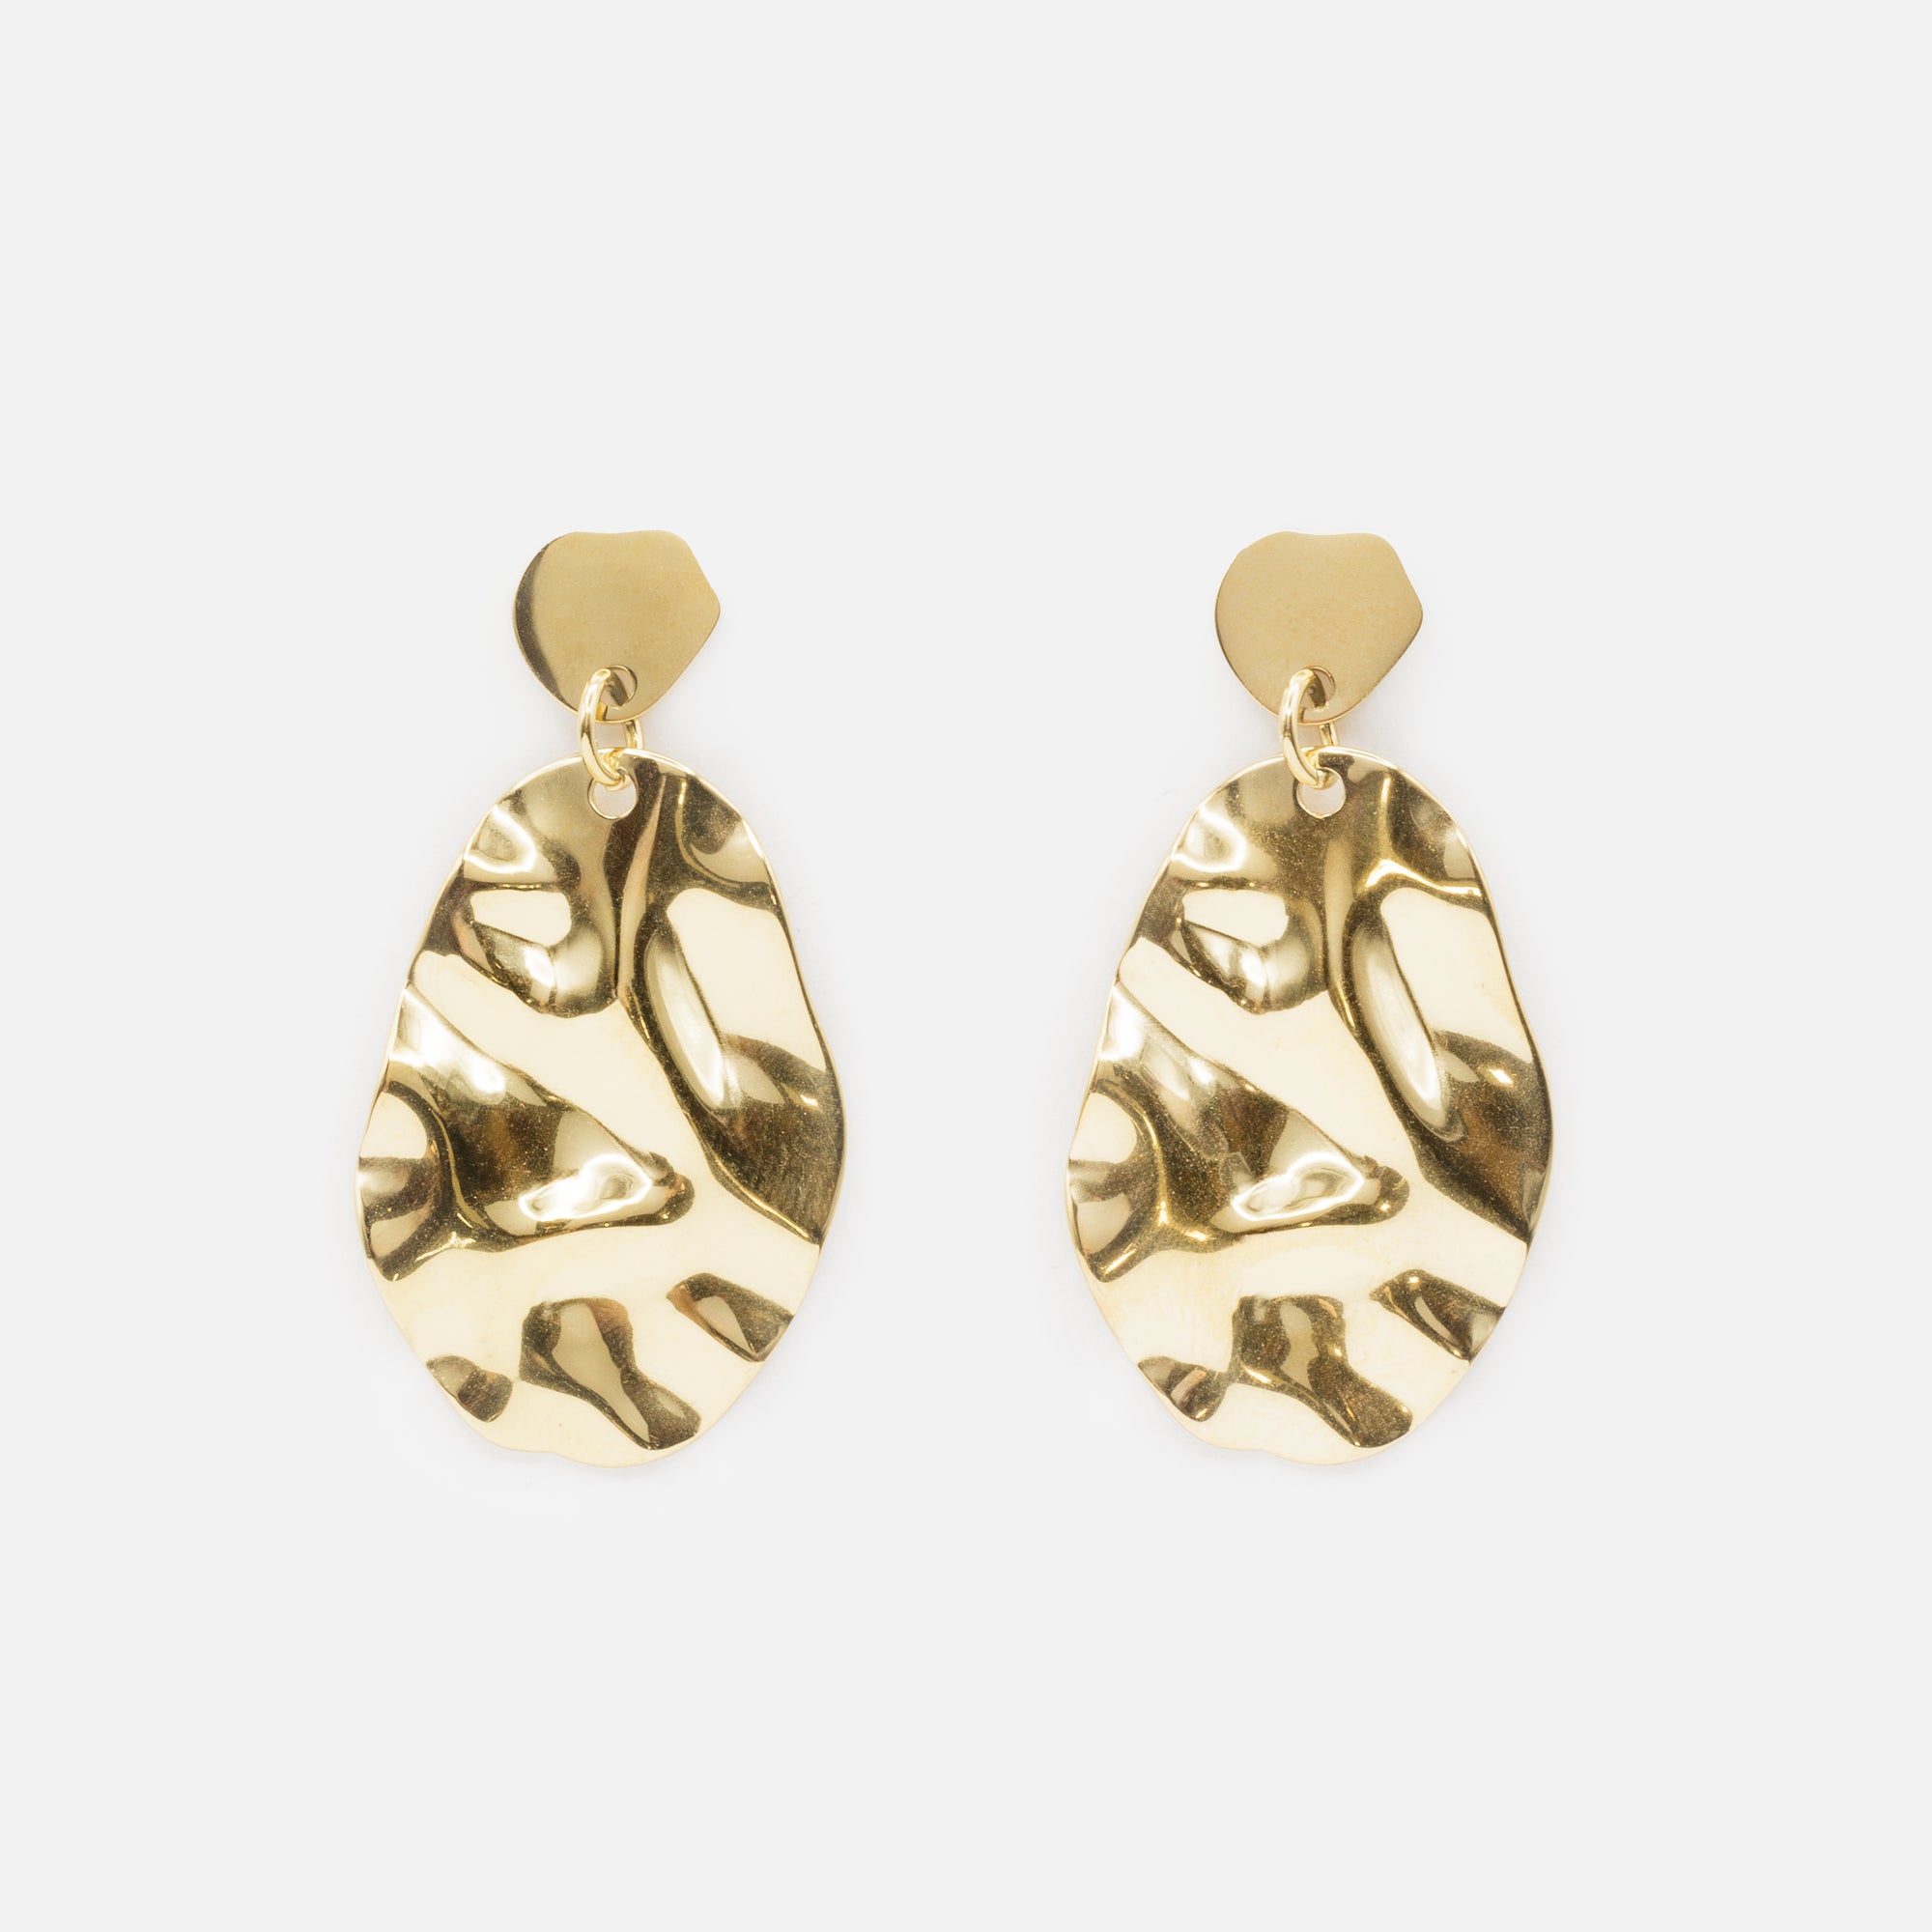 Gold earrings with crinkled oval plates in stainless steel